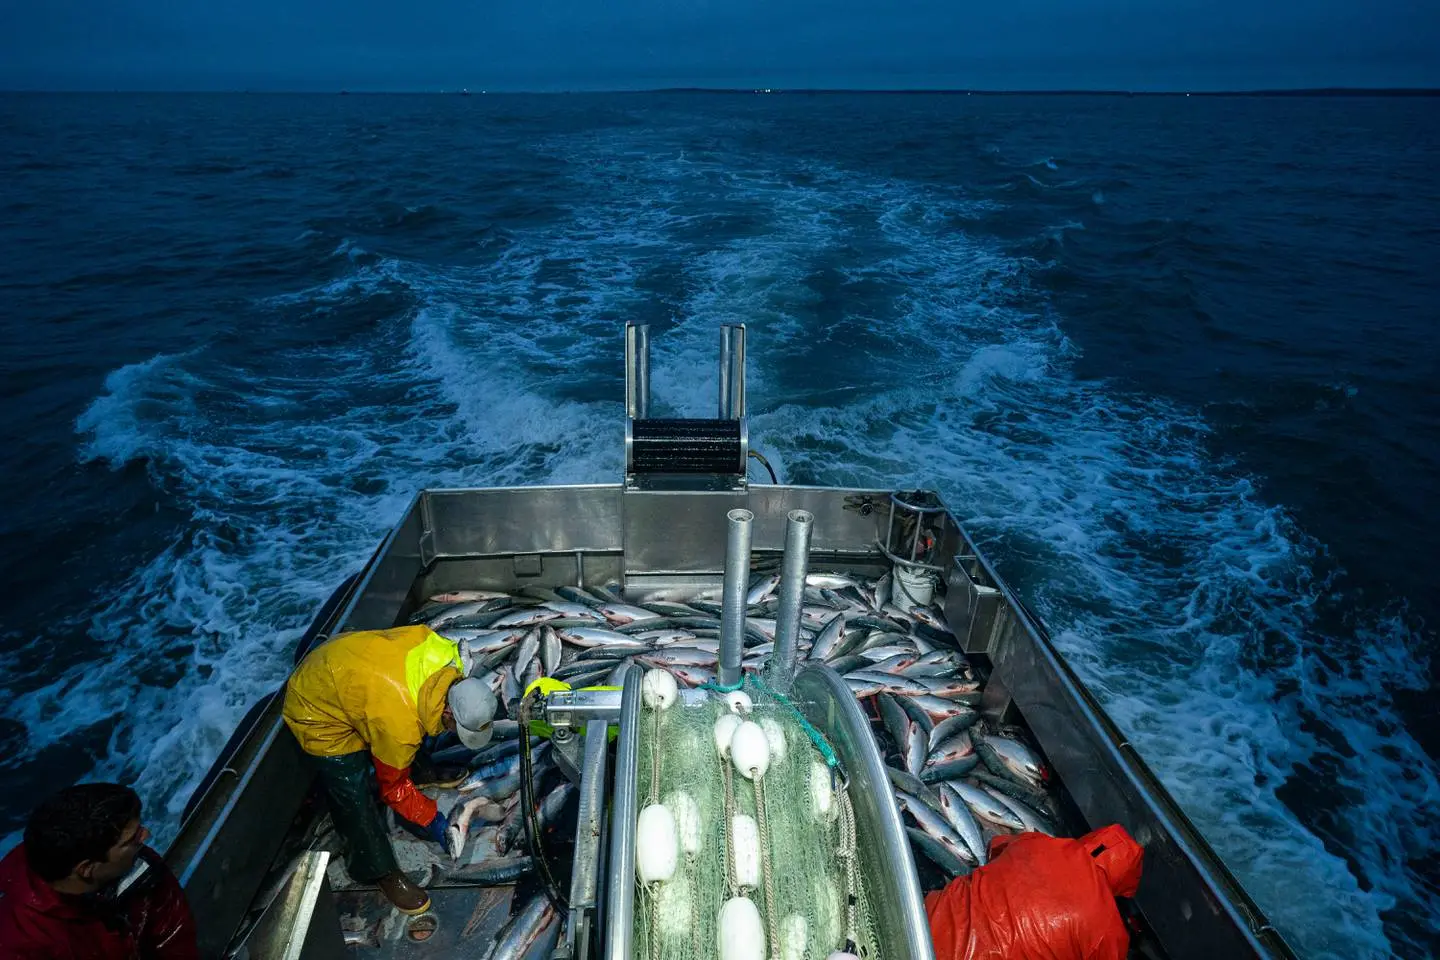 The stern of a medium size boat is full of fish while two workers tends to their processing. The nets are rolled up and the engine is running on the dark blue waters. It appears to be late evening or before sunrise.